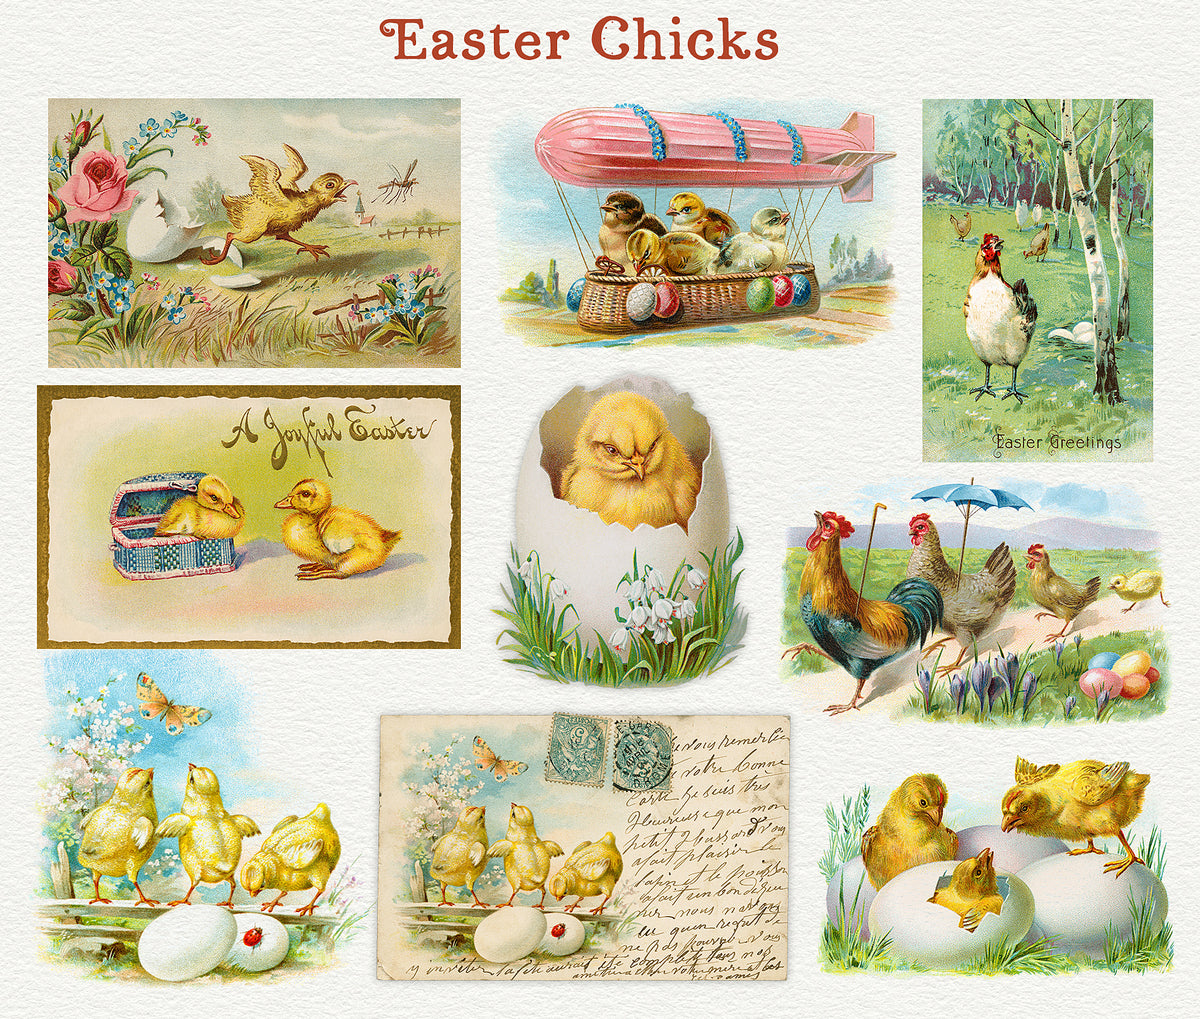 Vintage Easter Chicks and chickens illustration digital graphics from postcards.